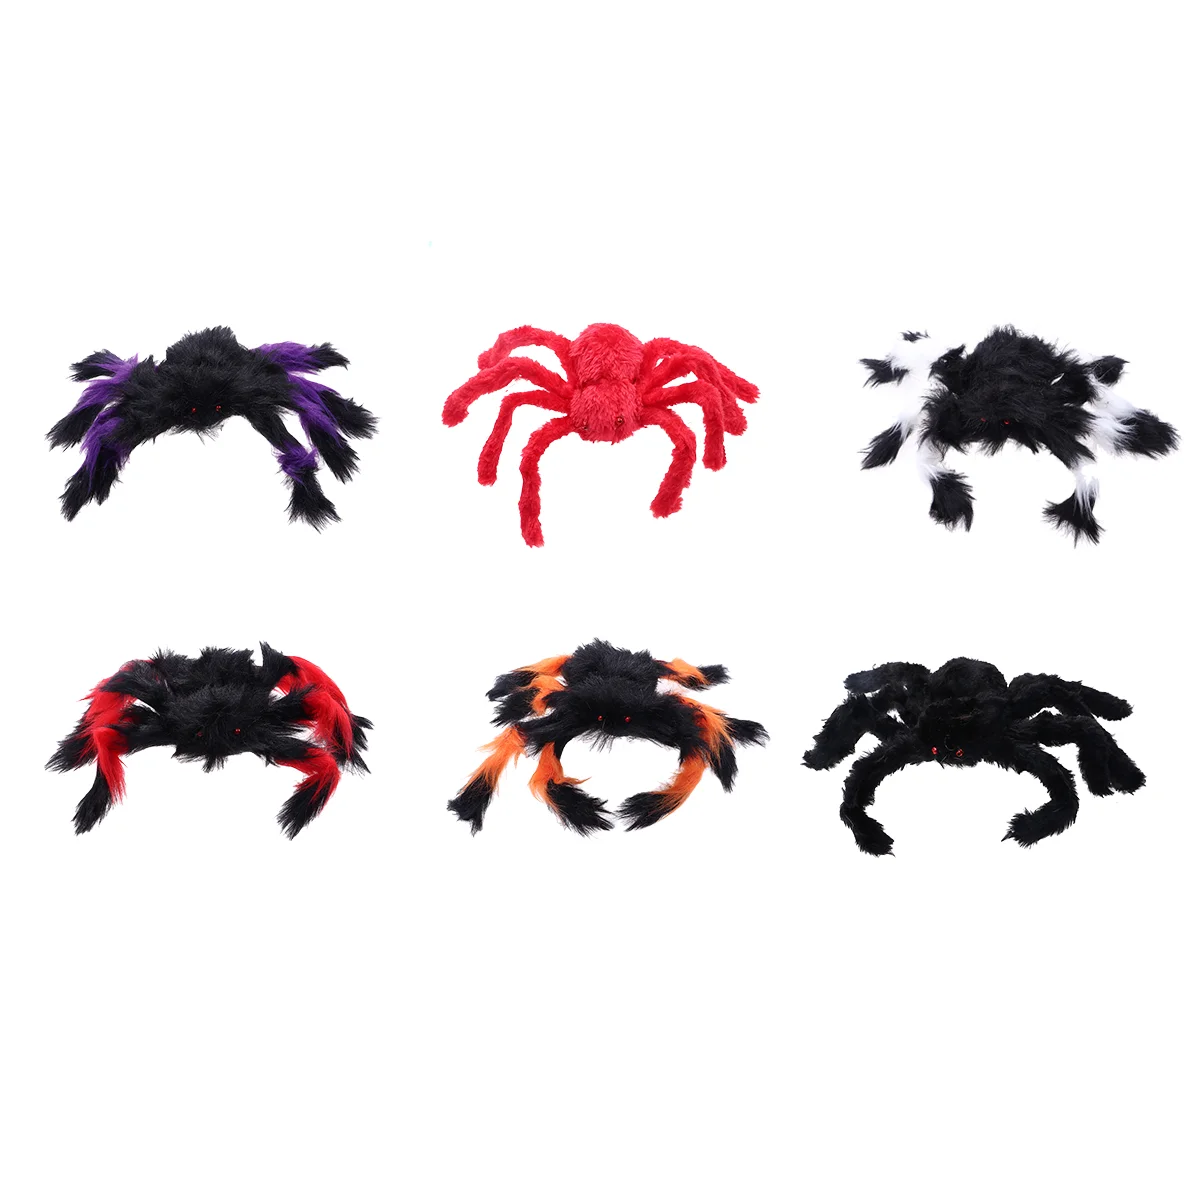 

6 Pcs Halloween Spider Realistic Spiders Horror Decorations Props Prank Simulation